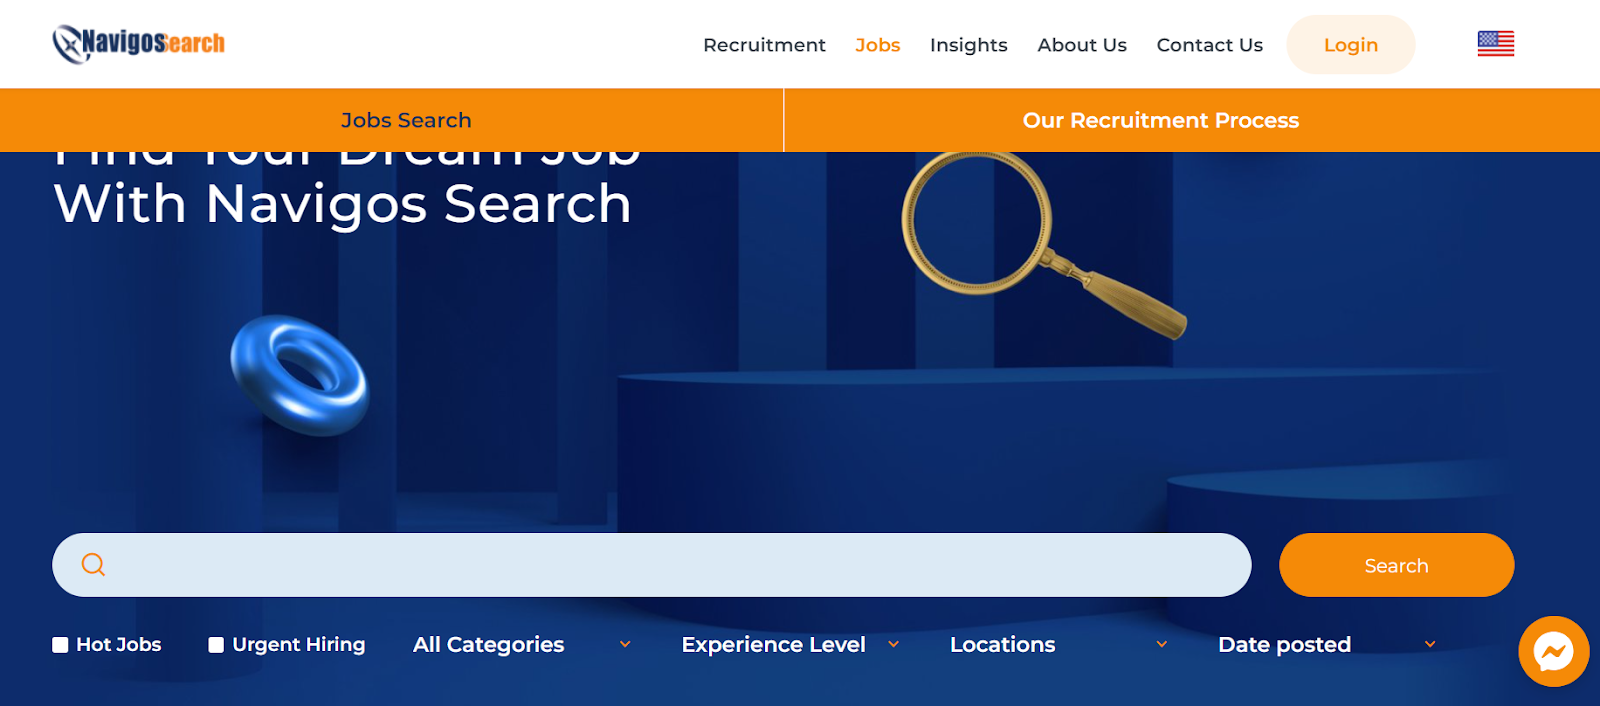 Navigos Search - Vietnam's leading mid- and high-level talent hunting company